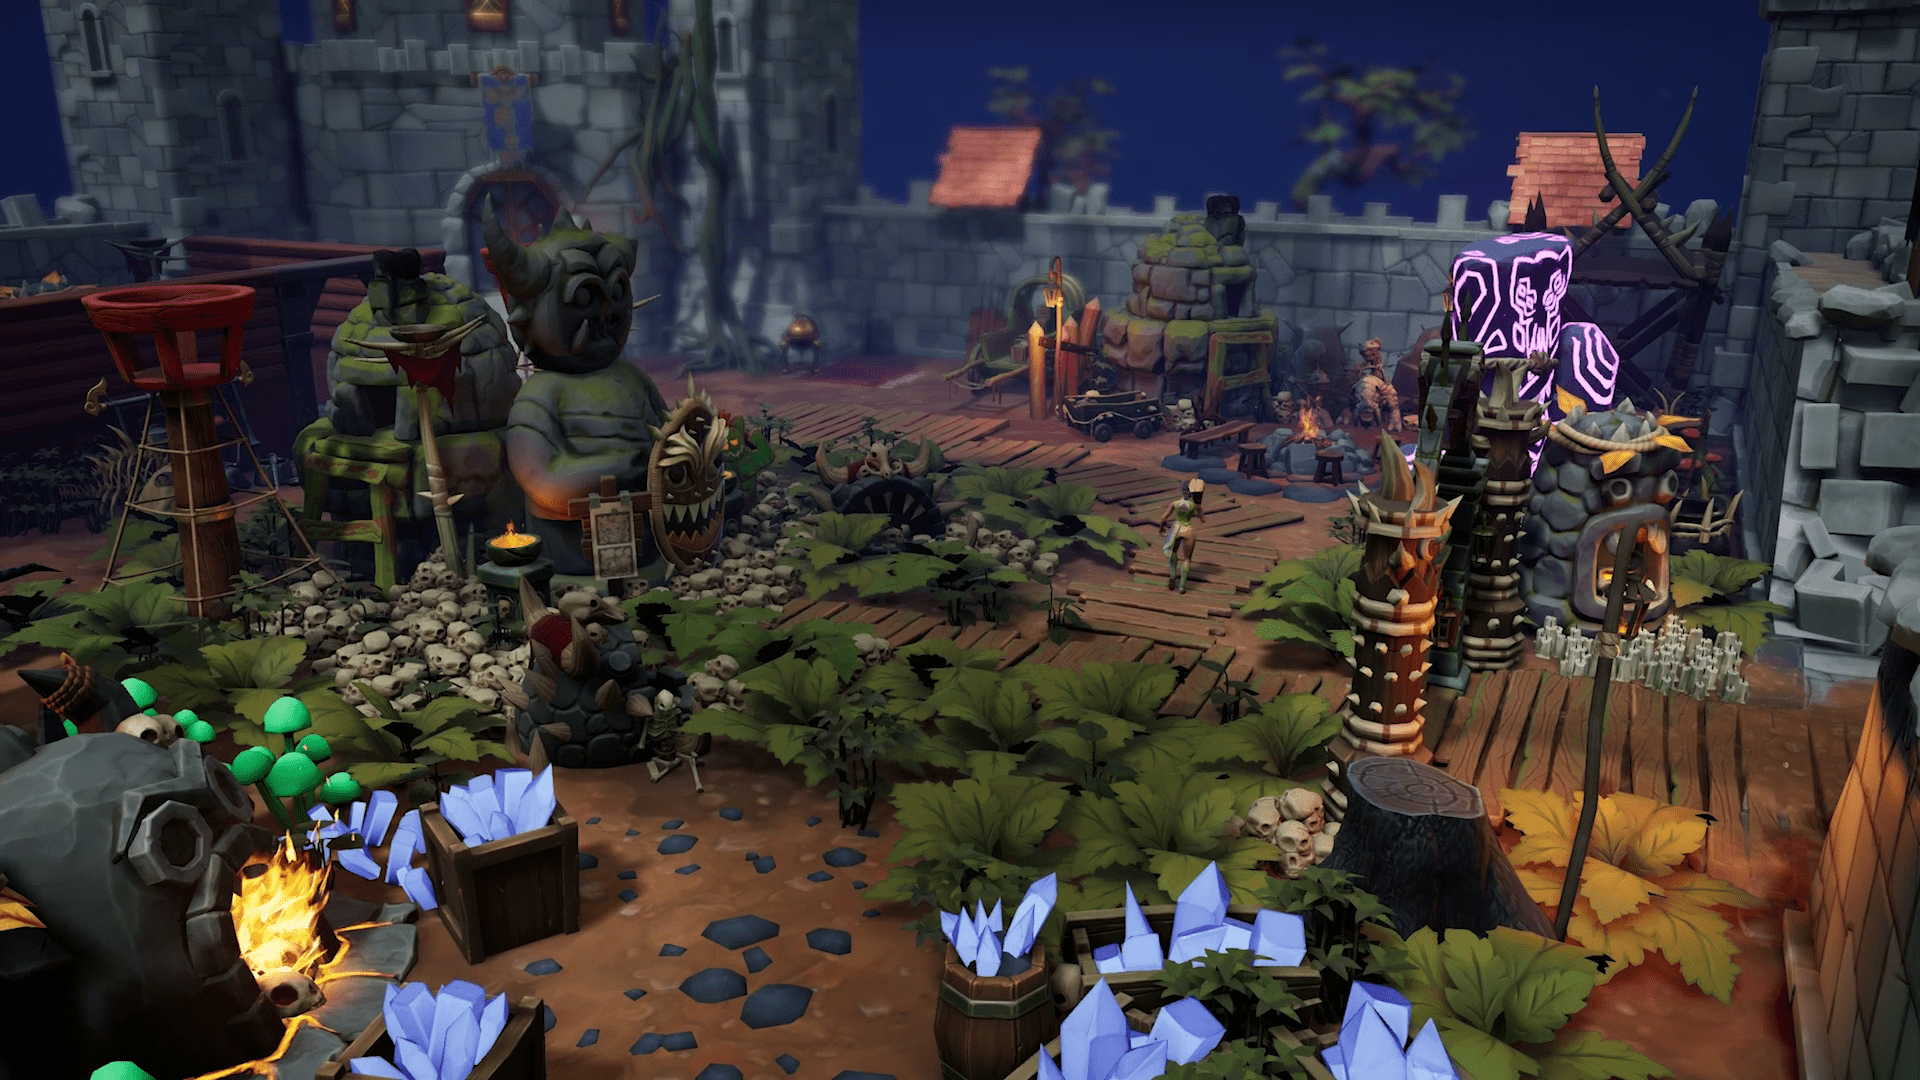 torchlight 3 ps4 review